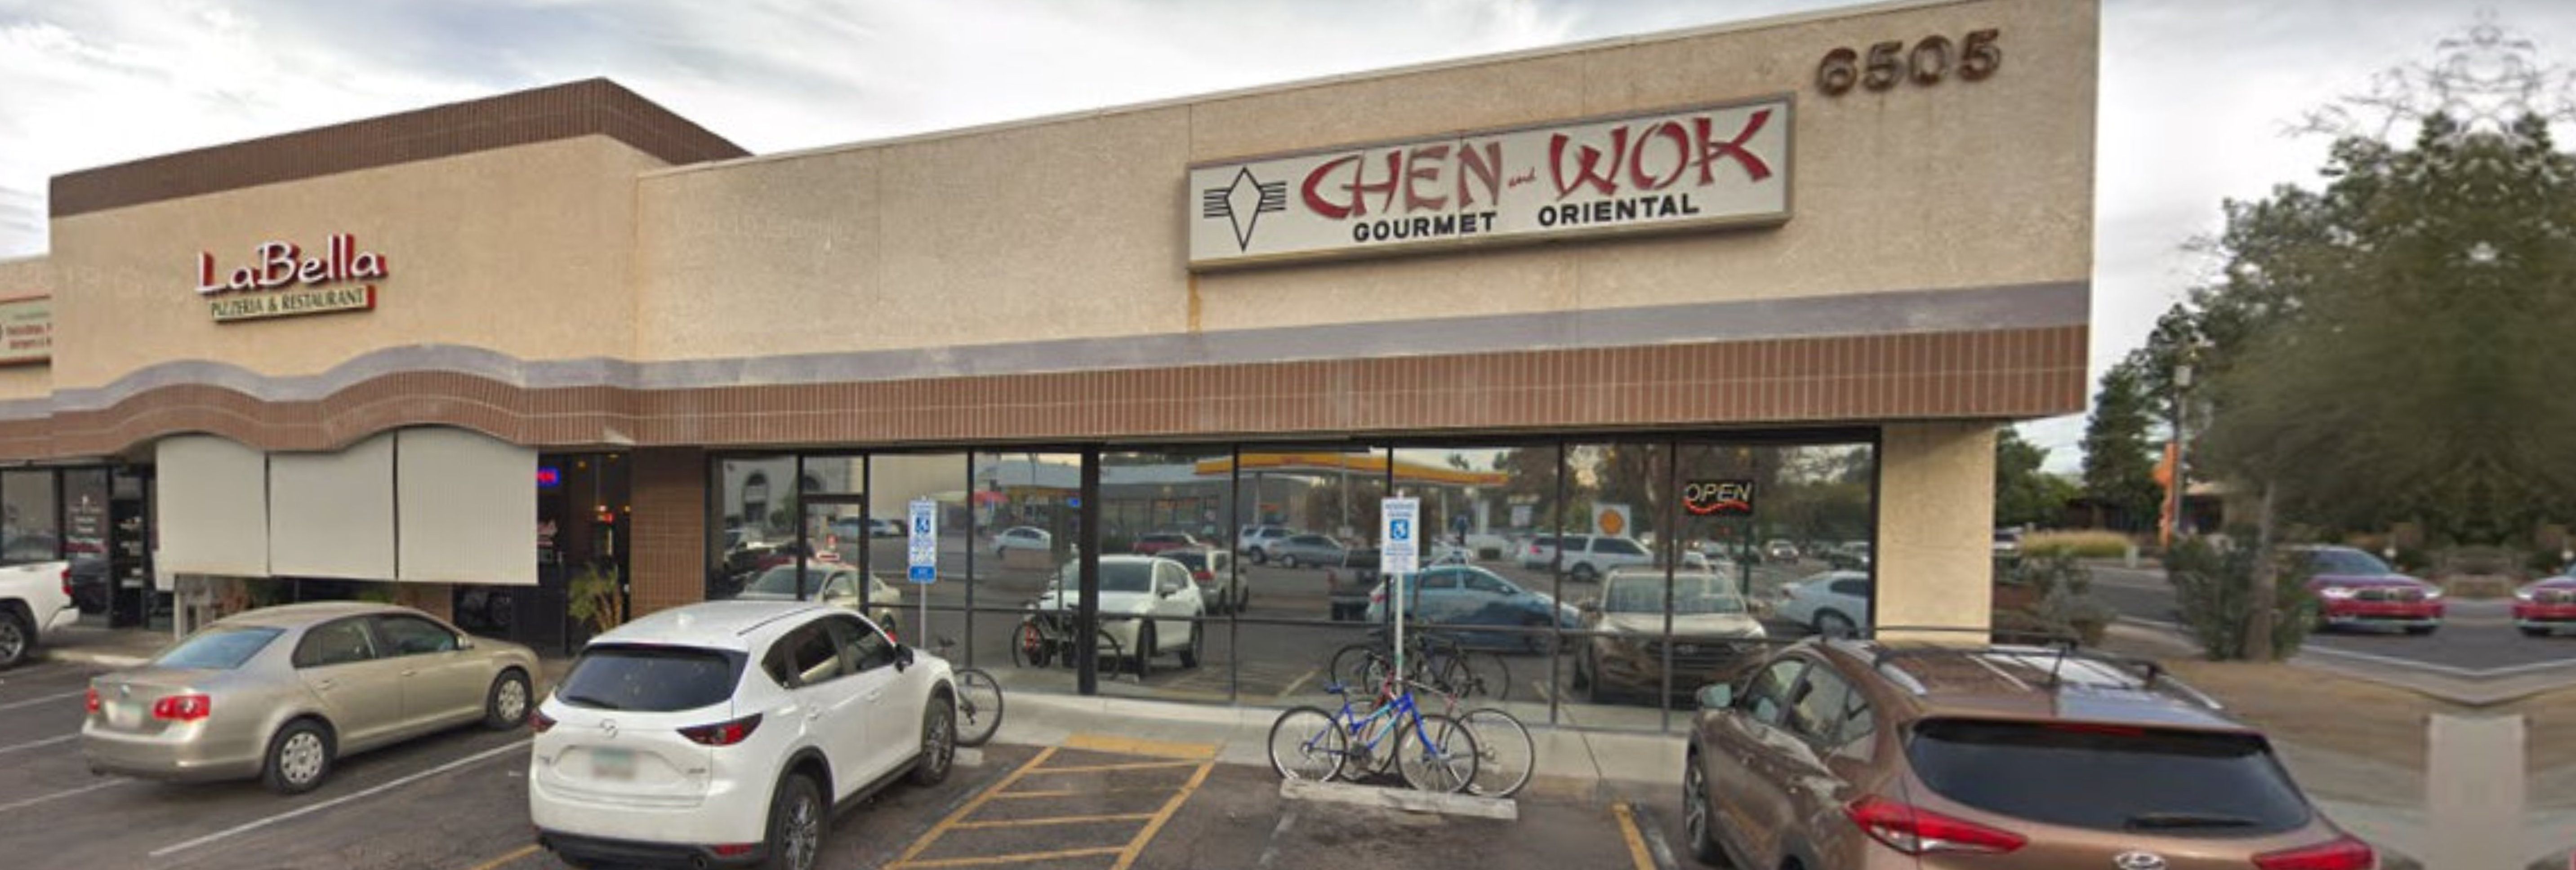 Visit the Best Chinese Food in Phoenix Chen Wok 1